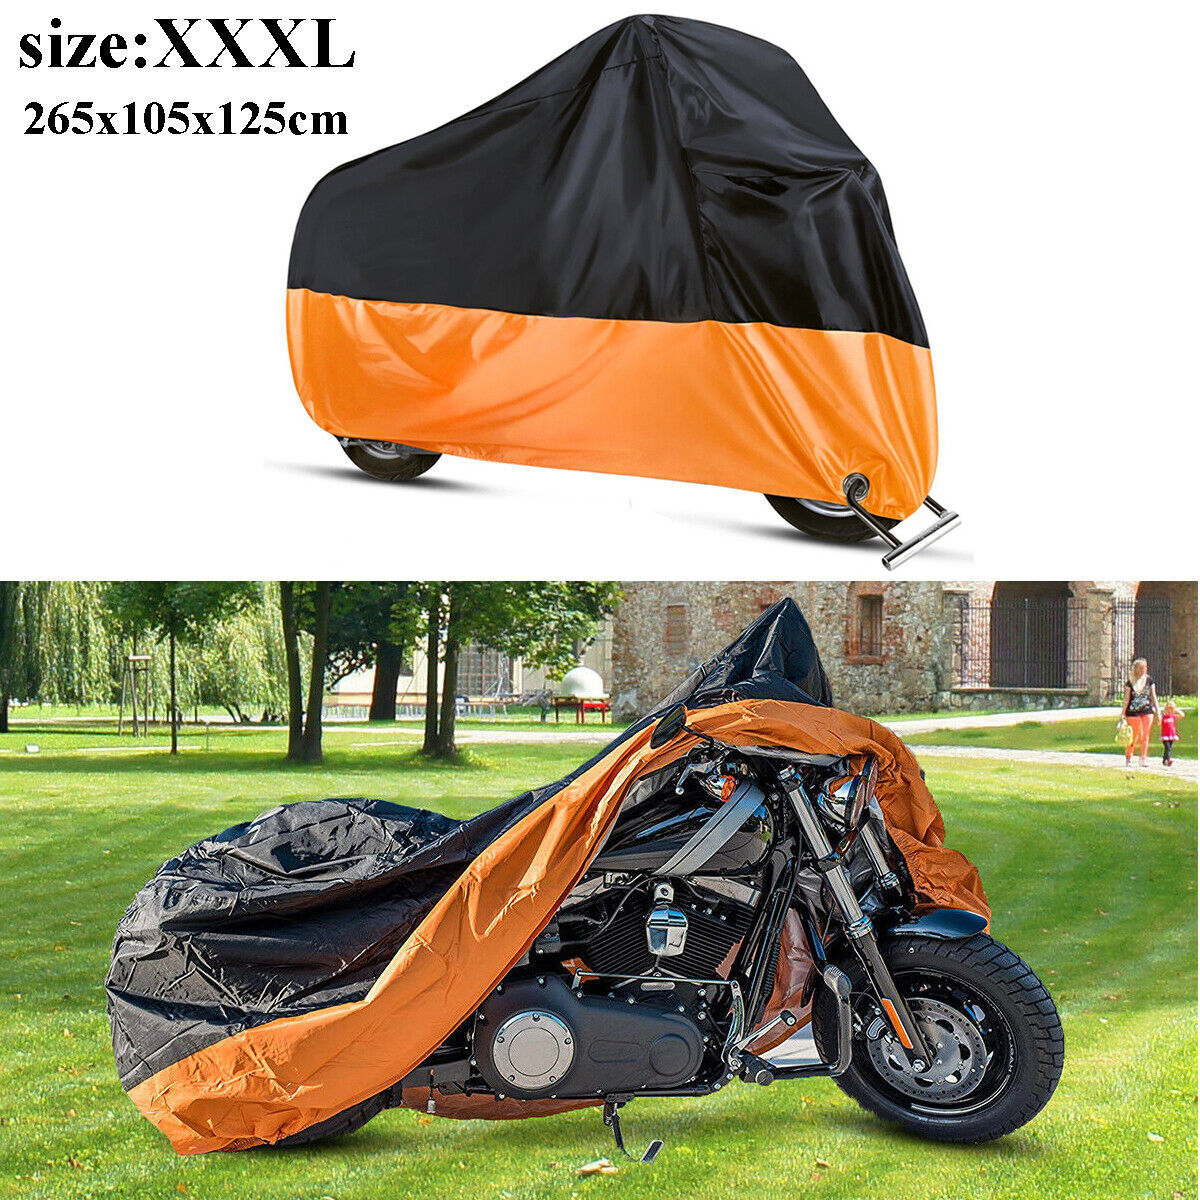 3XL Motorcycle Bike Cover Waterproof Fit For Harley Davidson Electra Glide Ultra